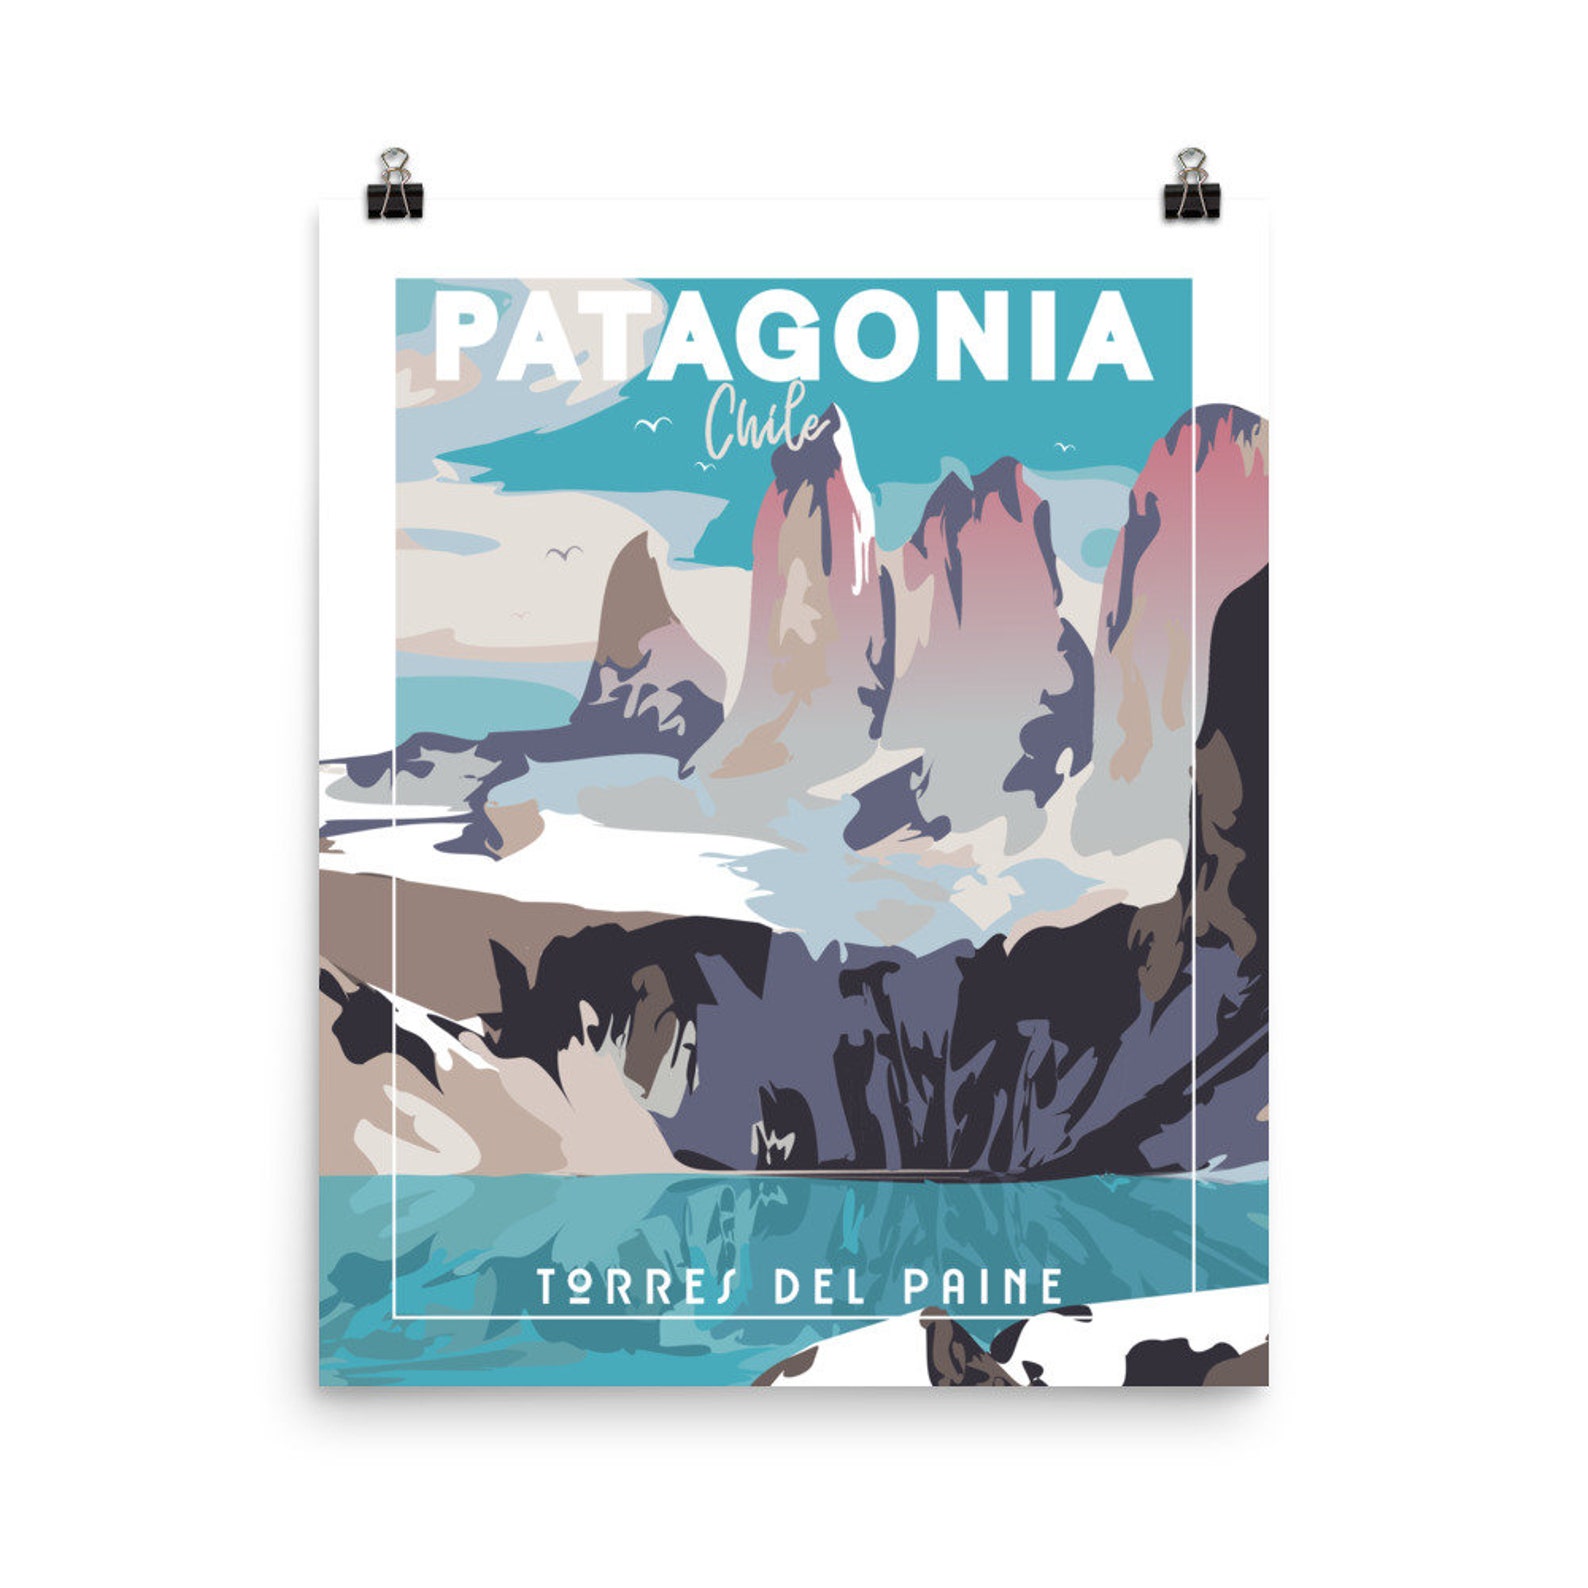 PATAGONIA Torres Del Paine CHILE Vintage Travel Poster Print | Etsy